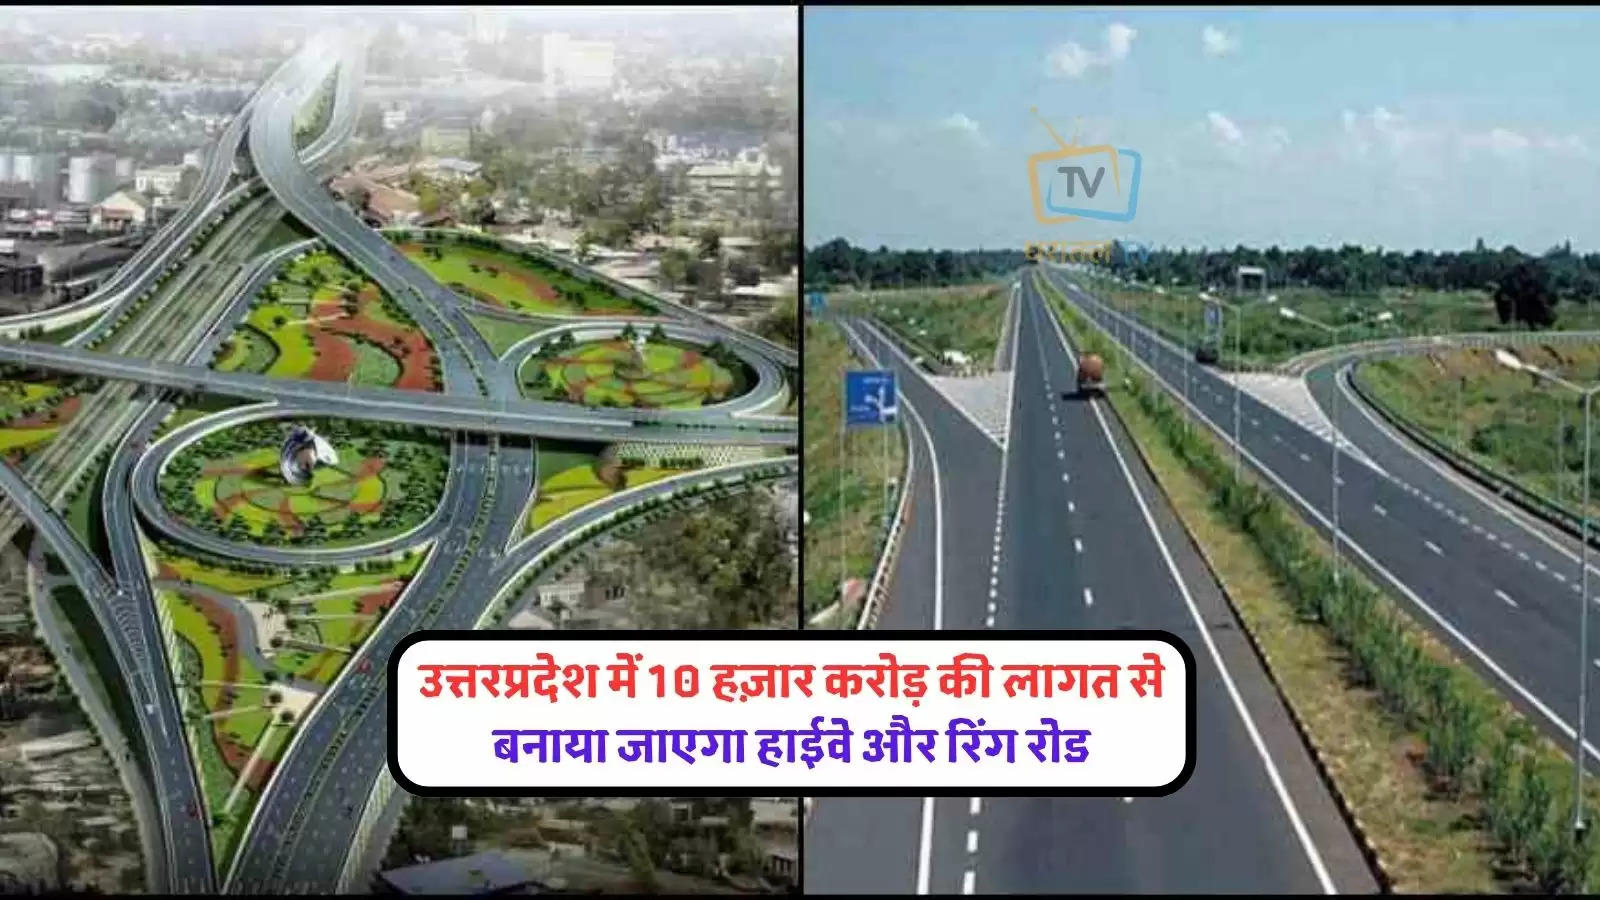 highways-and-ring-roads-are-going-to-be-built-in-these